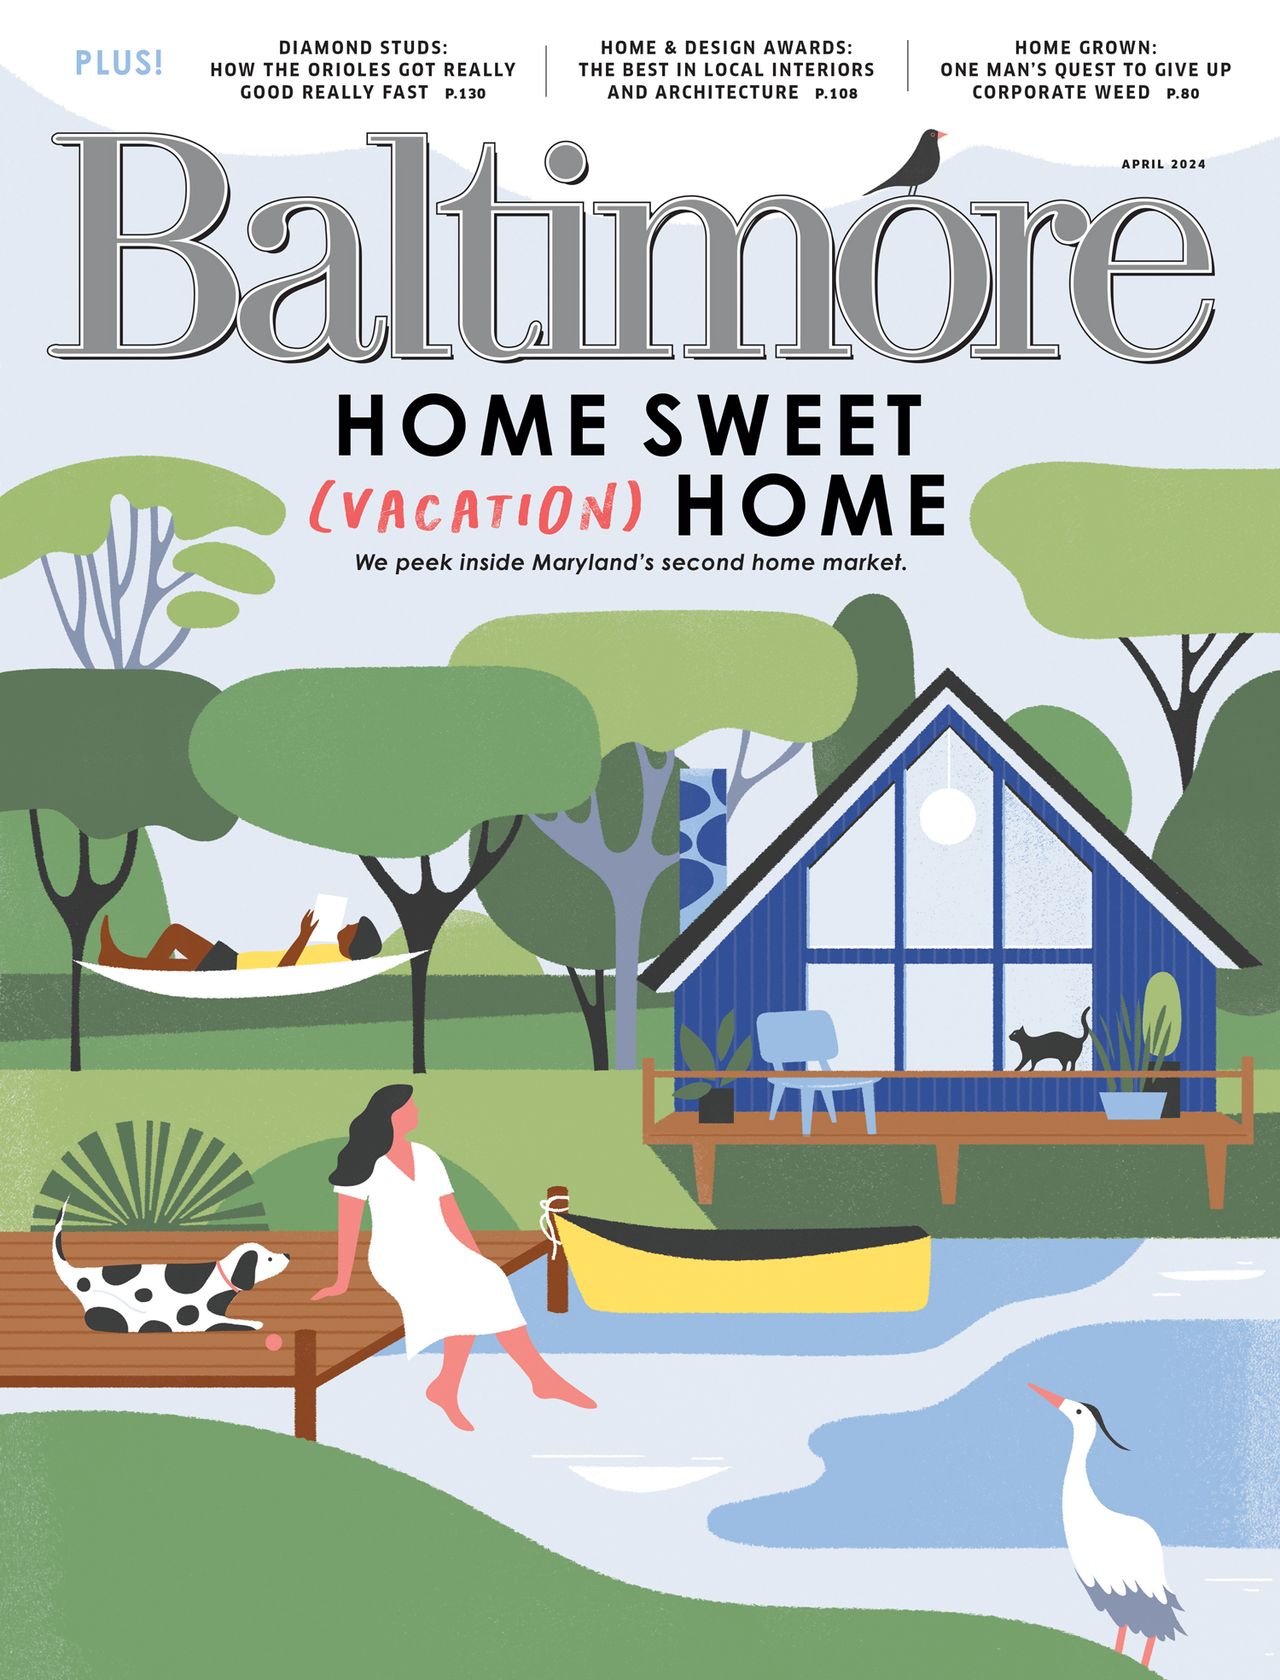 Baltimore Magazine cover illustration showing a vacation house by a lake